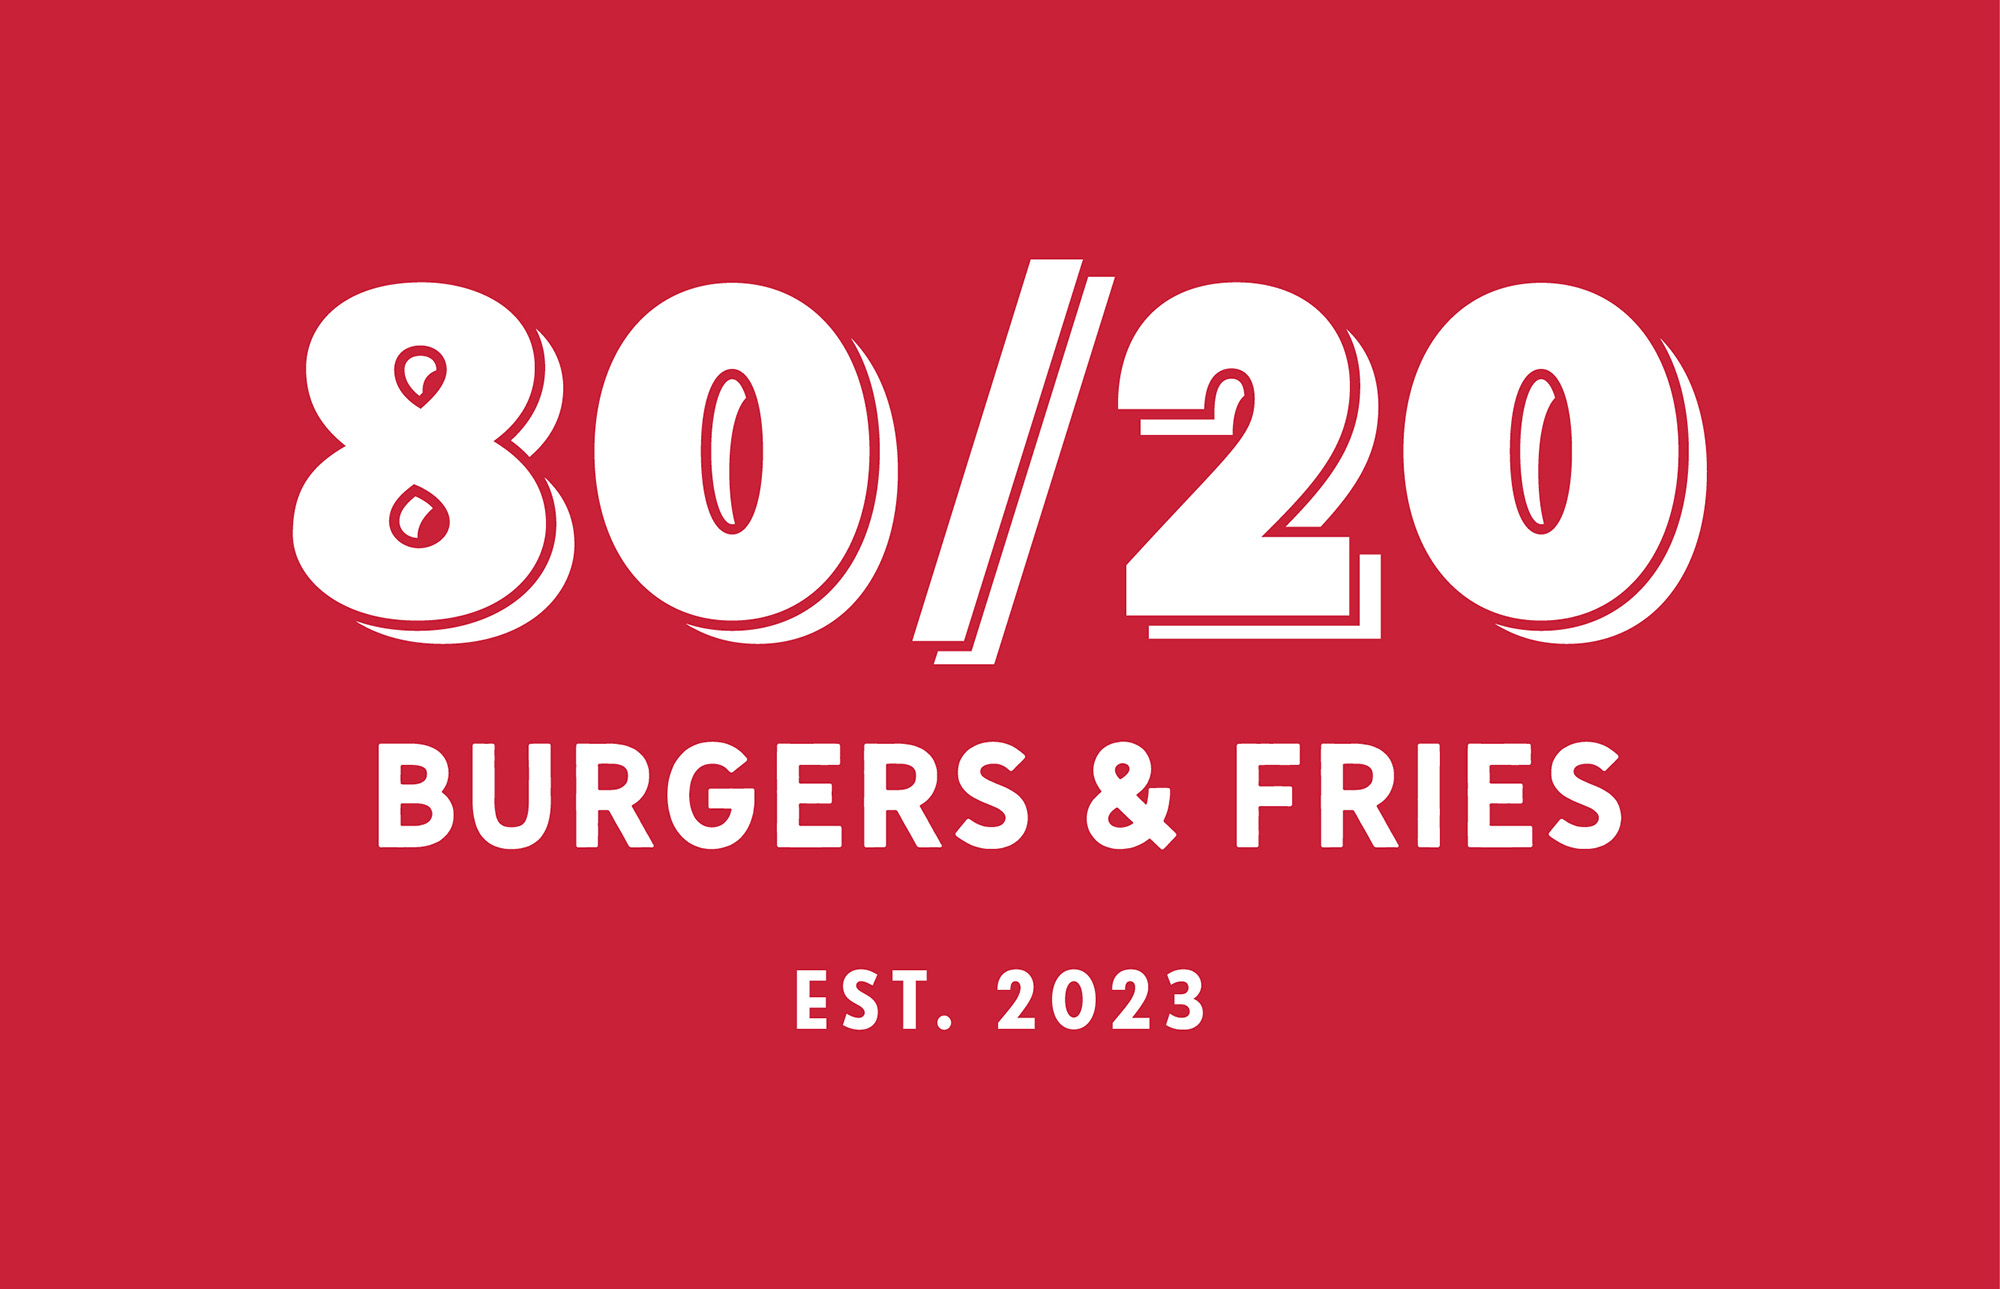 80/20 Burgers & Fries Brand Identity Design by Monday Design Co.